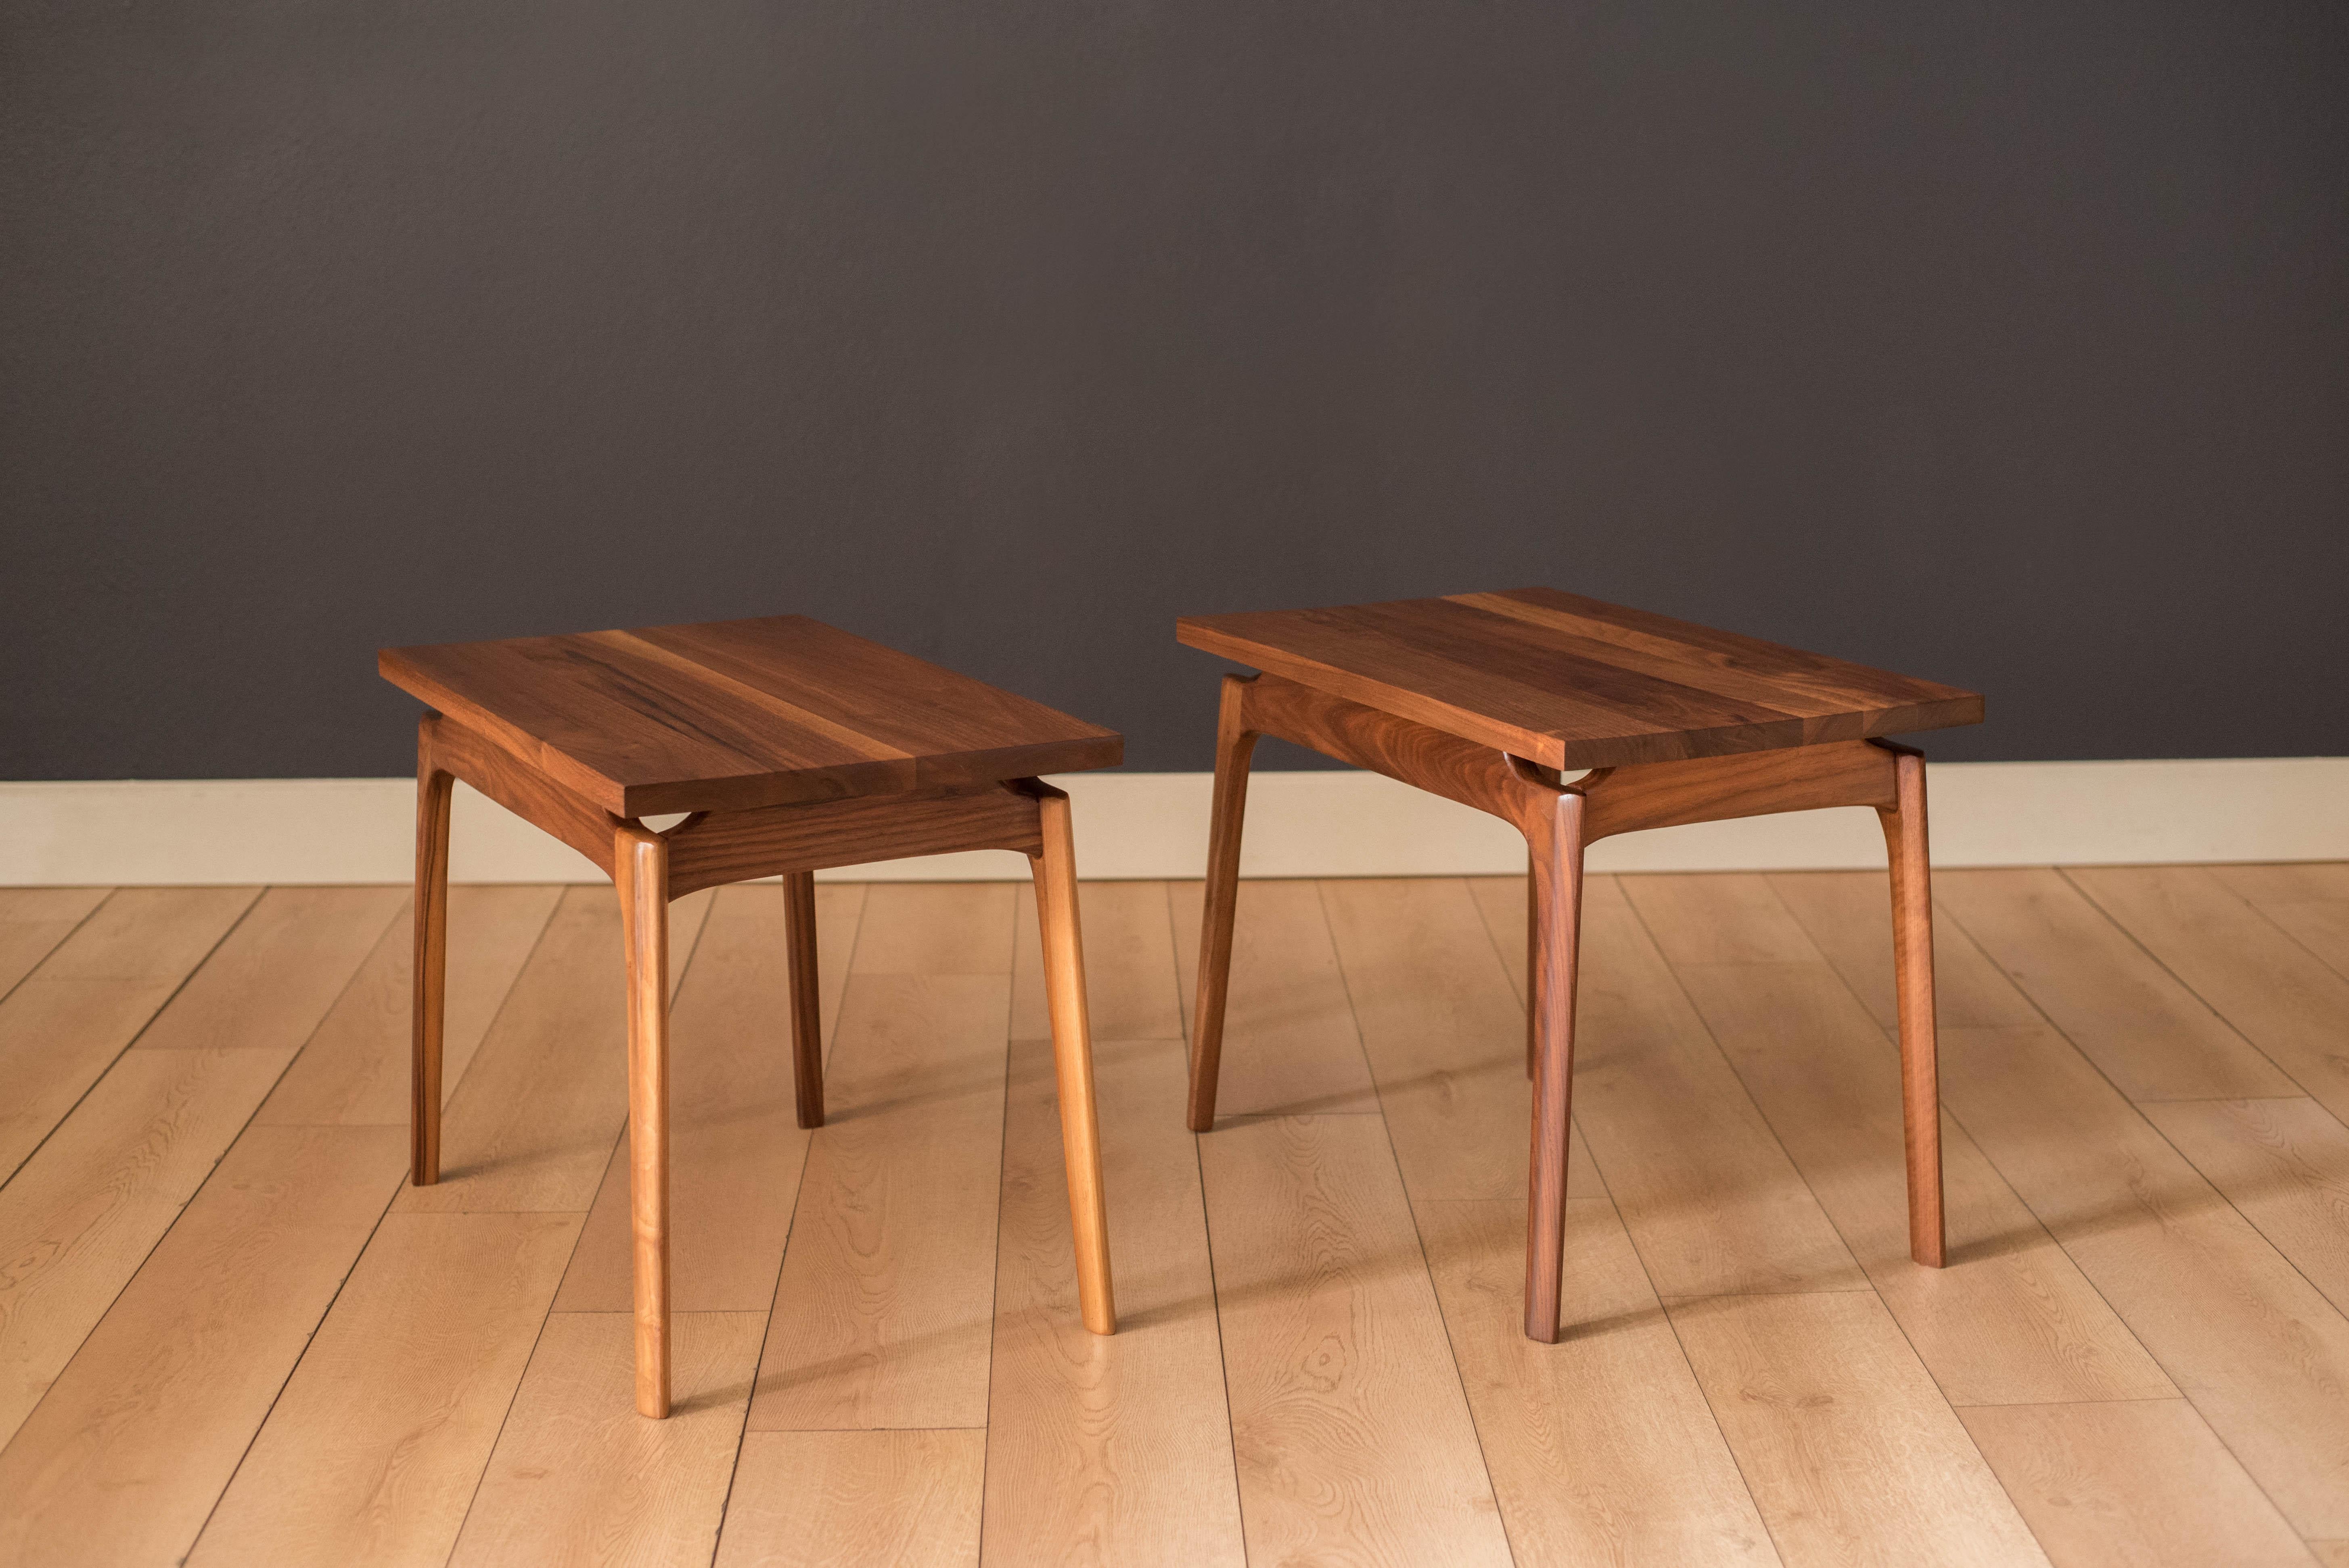 Vintage pair of side tables in solid planked walnut, circa 1960s. Features a floating tabletop design supported by contoured sculpted legs. Price is for the pair.